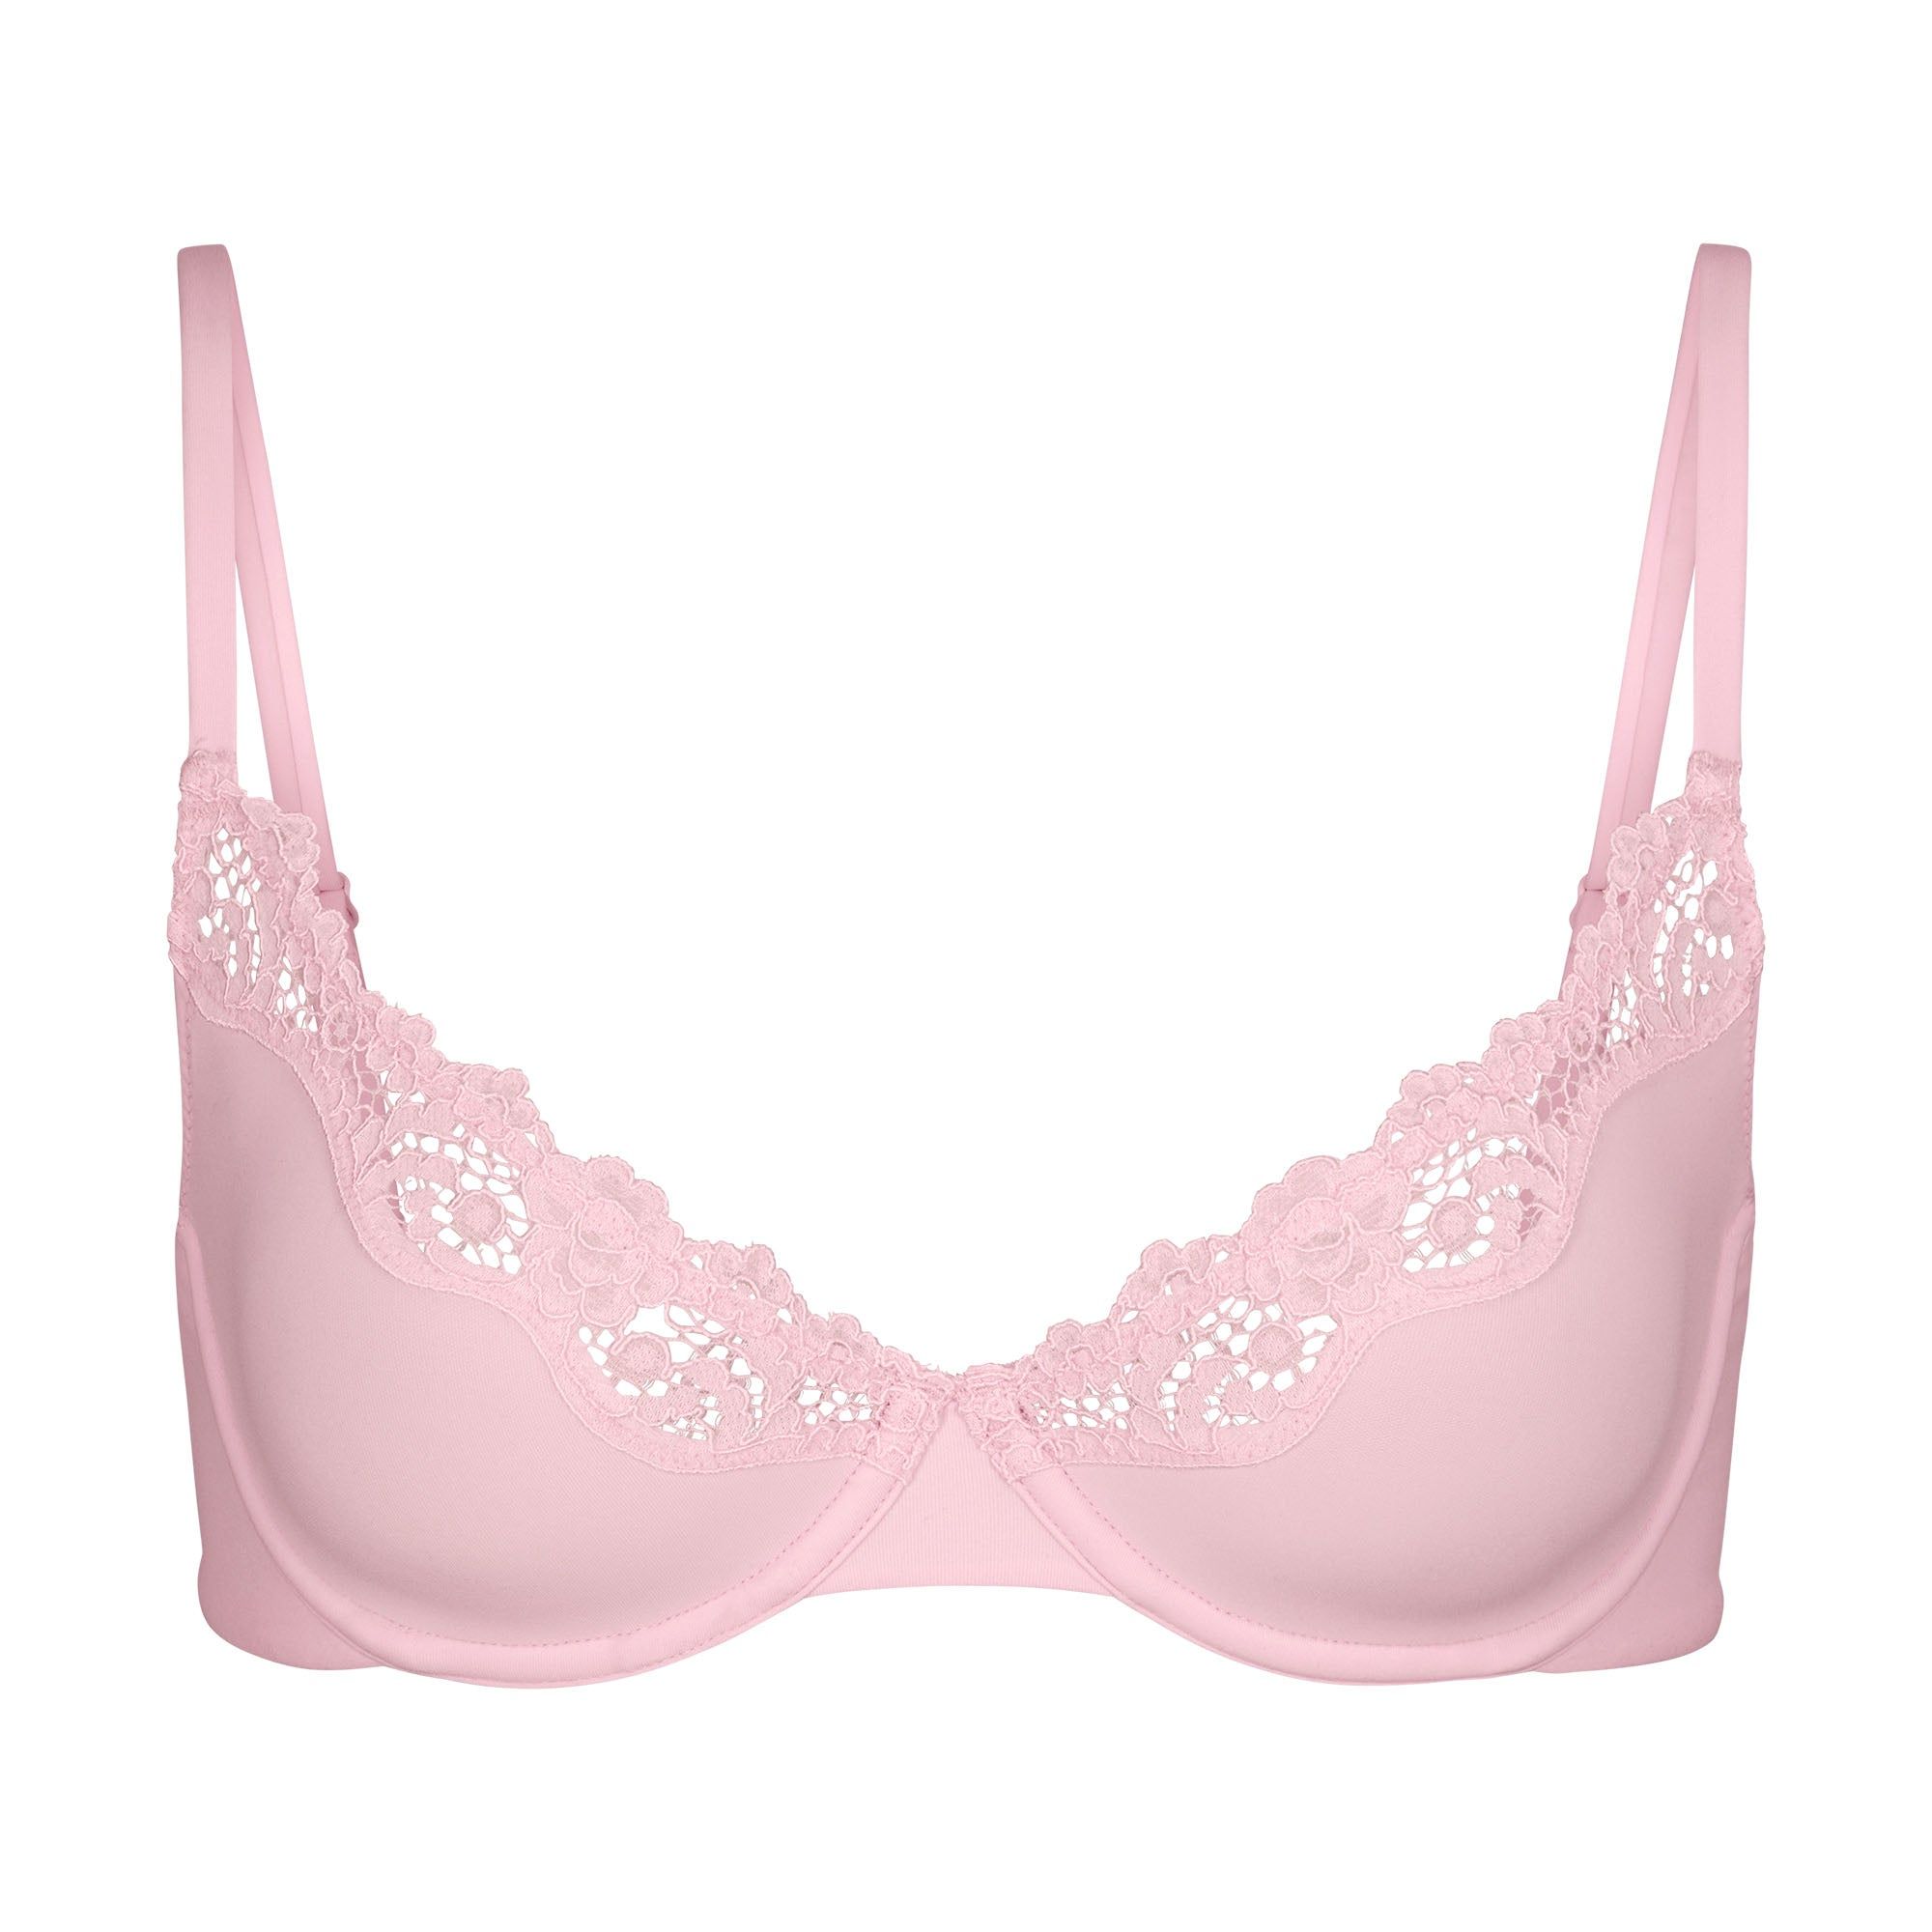 Comfortable Support: Stay Stylish in Pink Bras